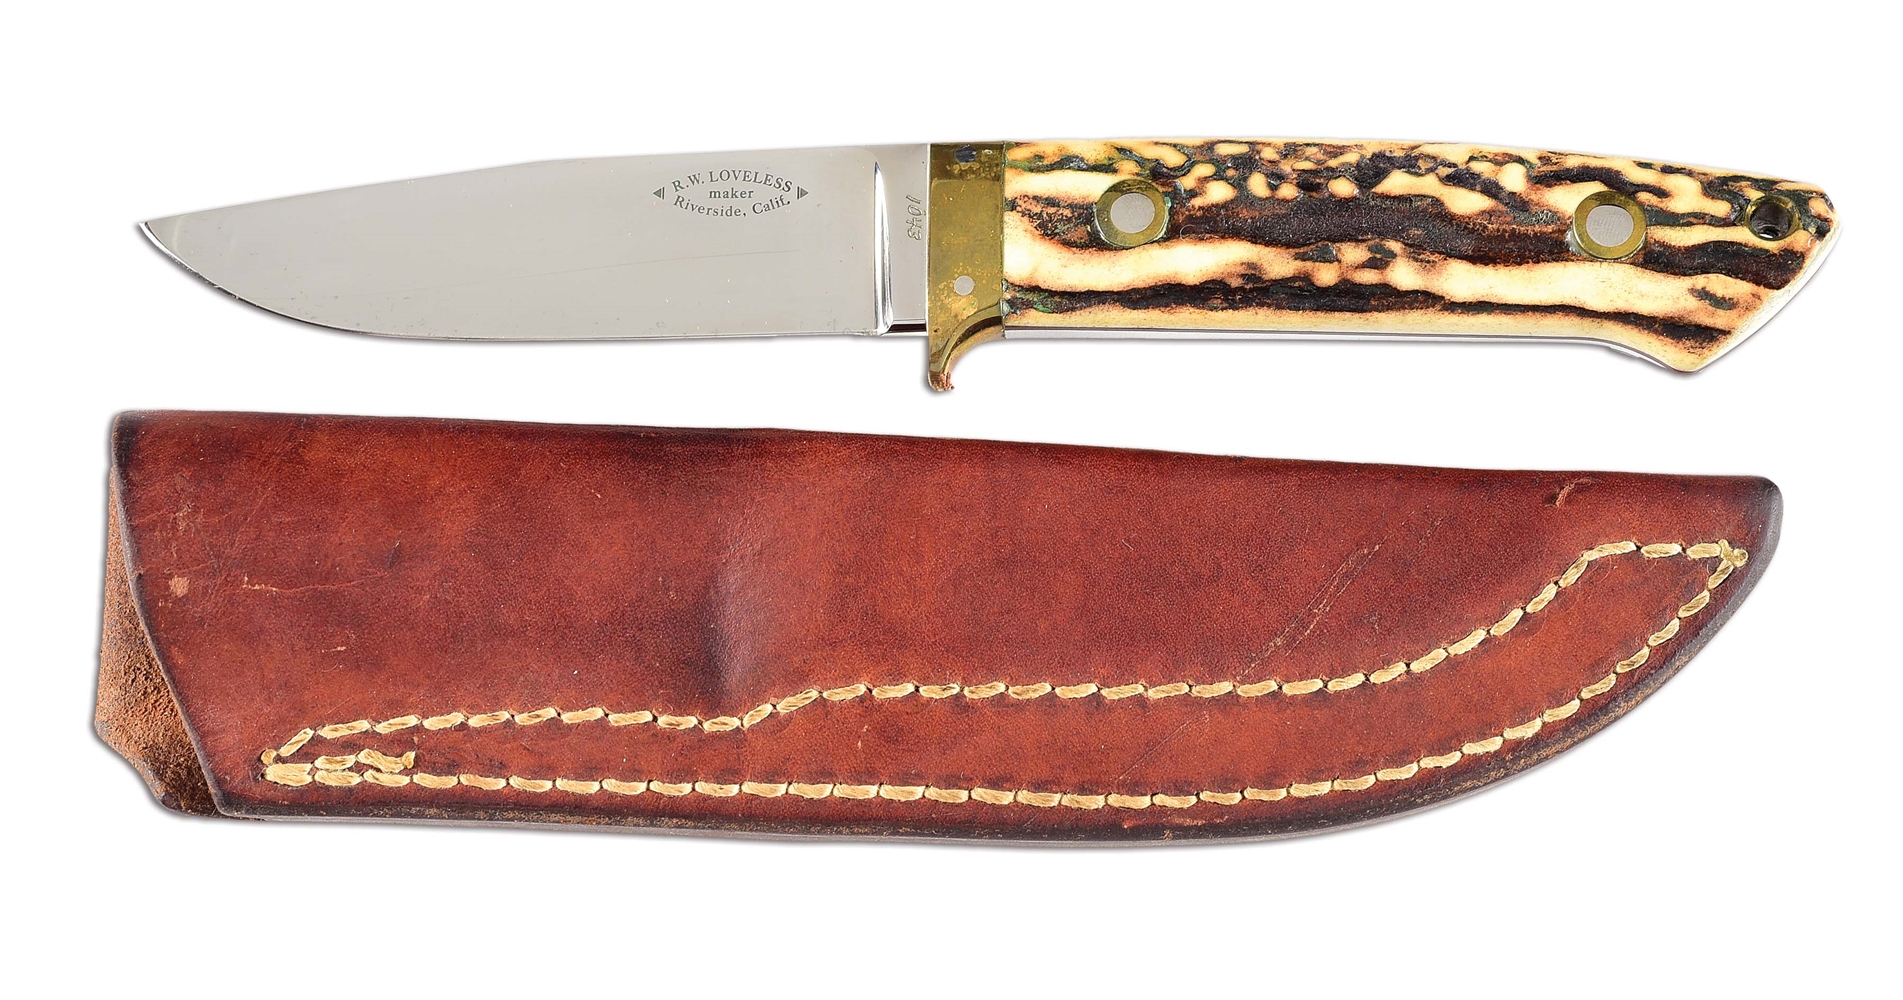 R.W. LOVELESS STAG HANDLE KNIFE WITH MATCHING SHEATH.